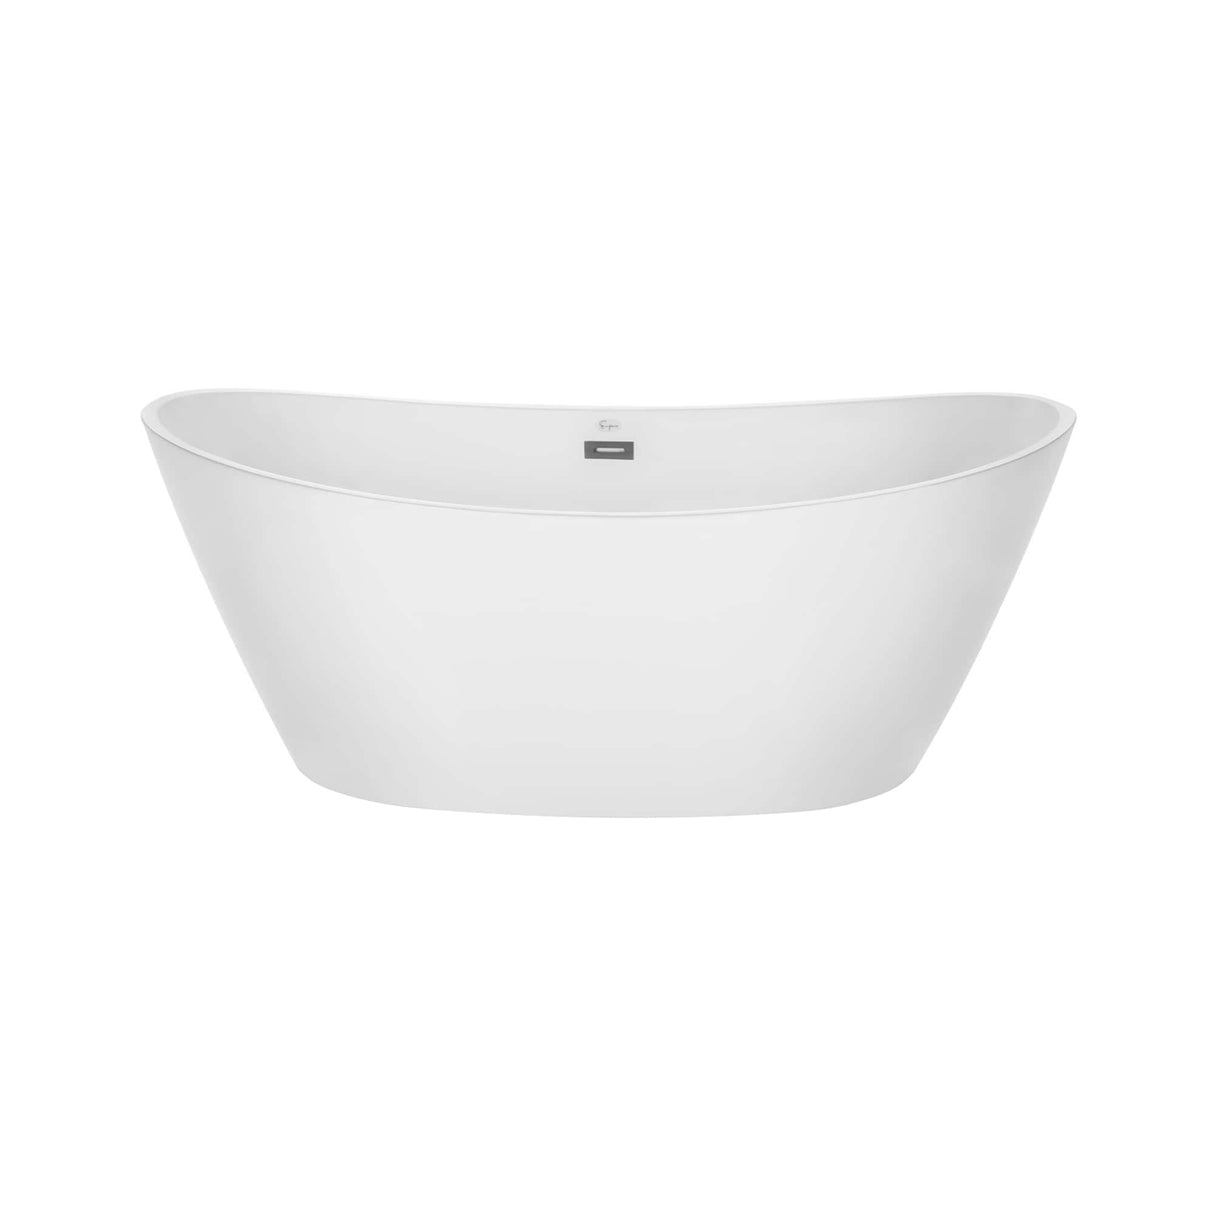 Empava-59FT1518LED freestanding acrylic soaking oval modern white bathtub with LED Lights front view